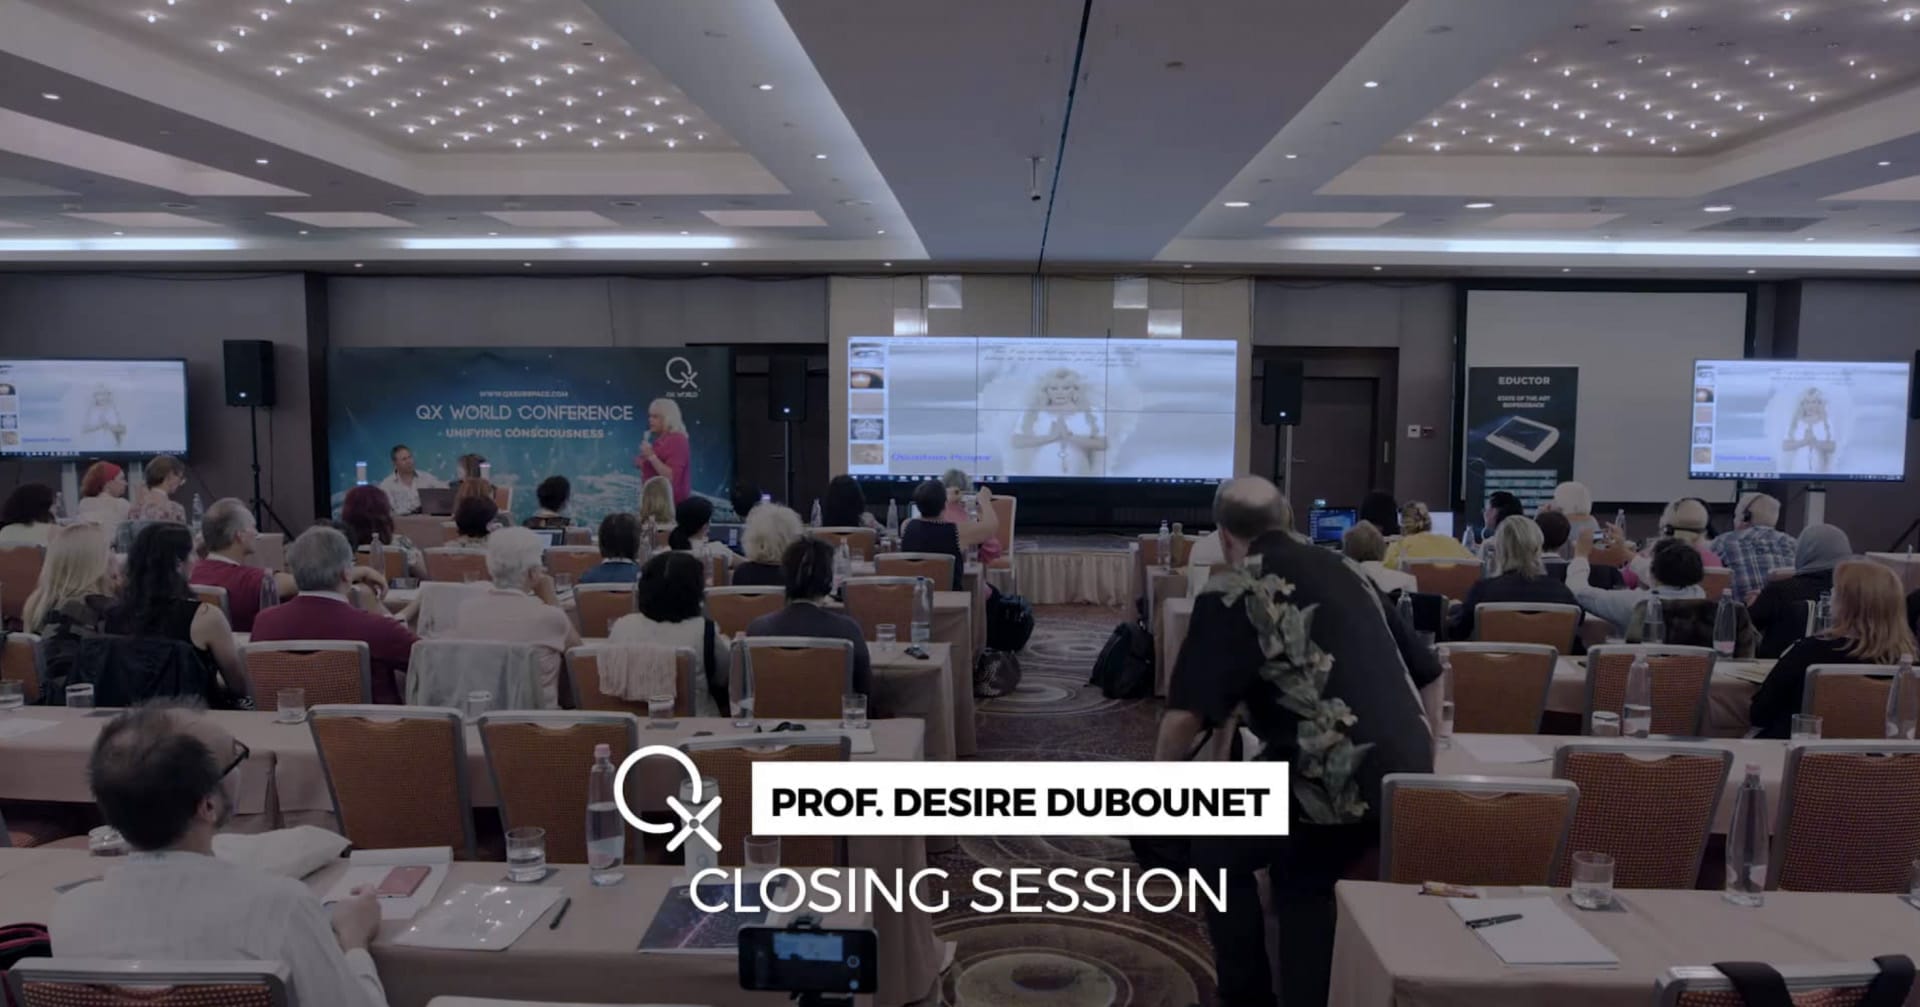 Congress ’18: Clossing session by Prof. Desire Dubounet